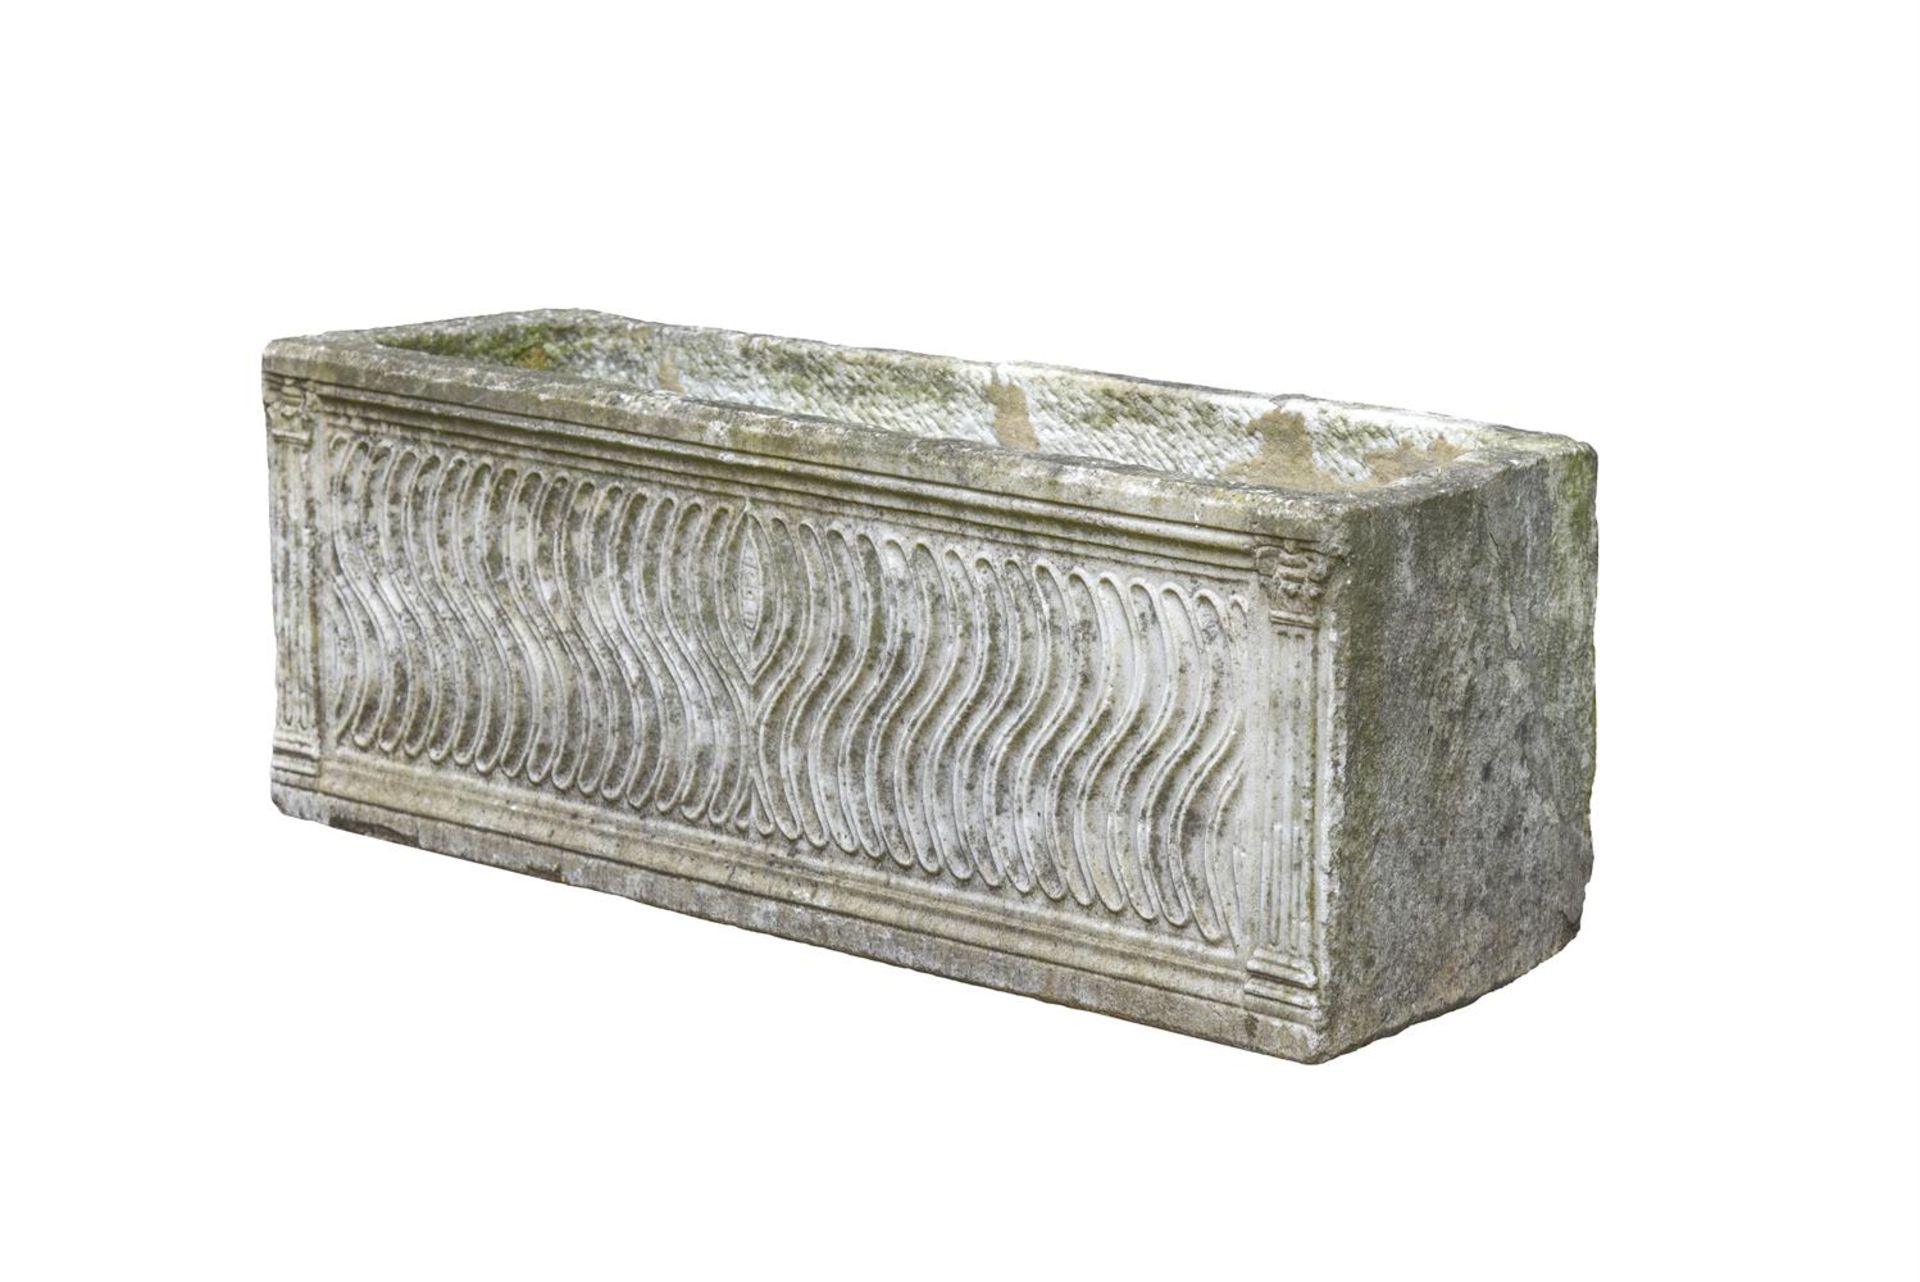 A ROMAN MARBLE STRIGILATED SARCOPHAGUS, CIRCA LATE 2ND-3RD CENTURY A.D. - Image 2 of 3